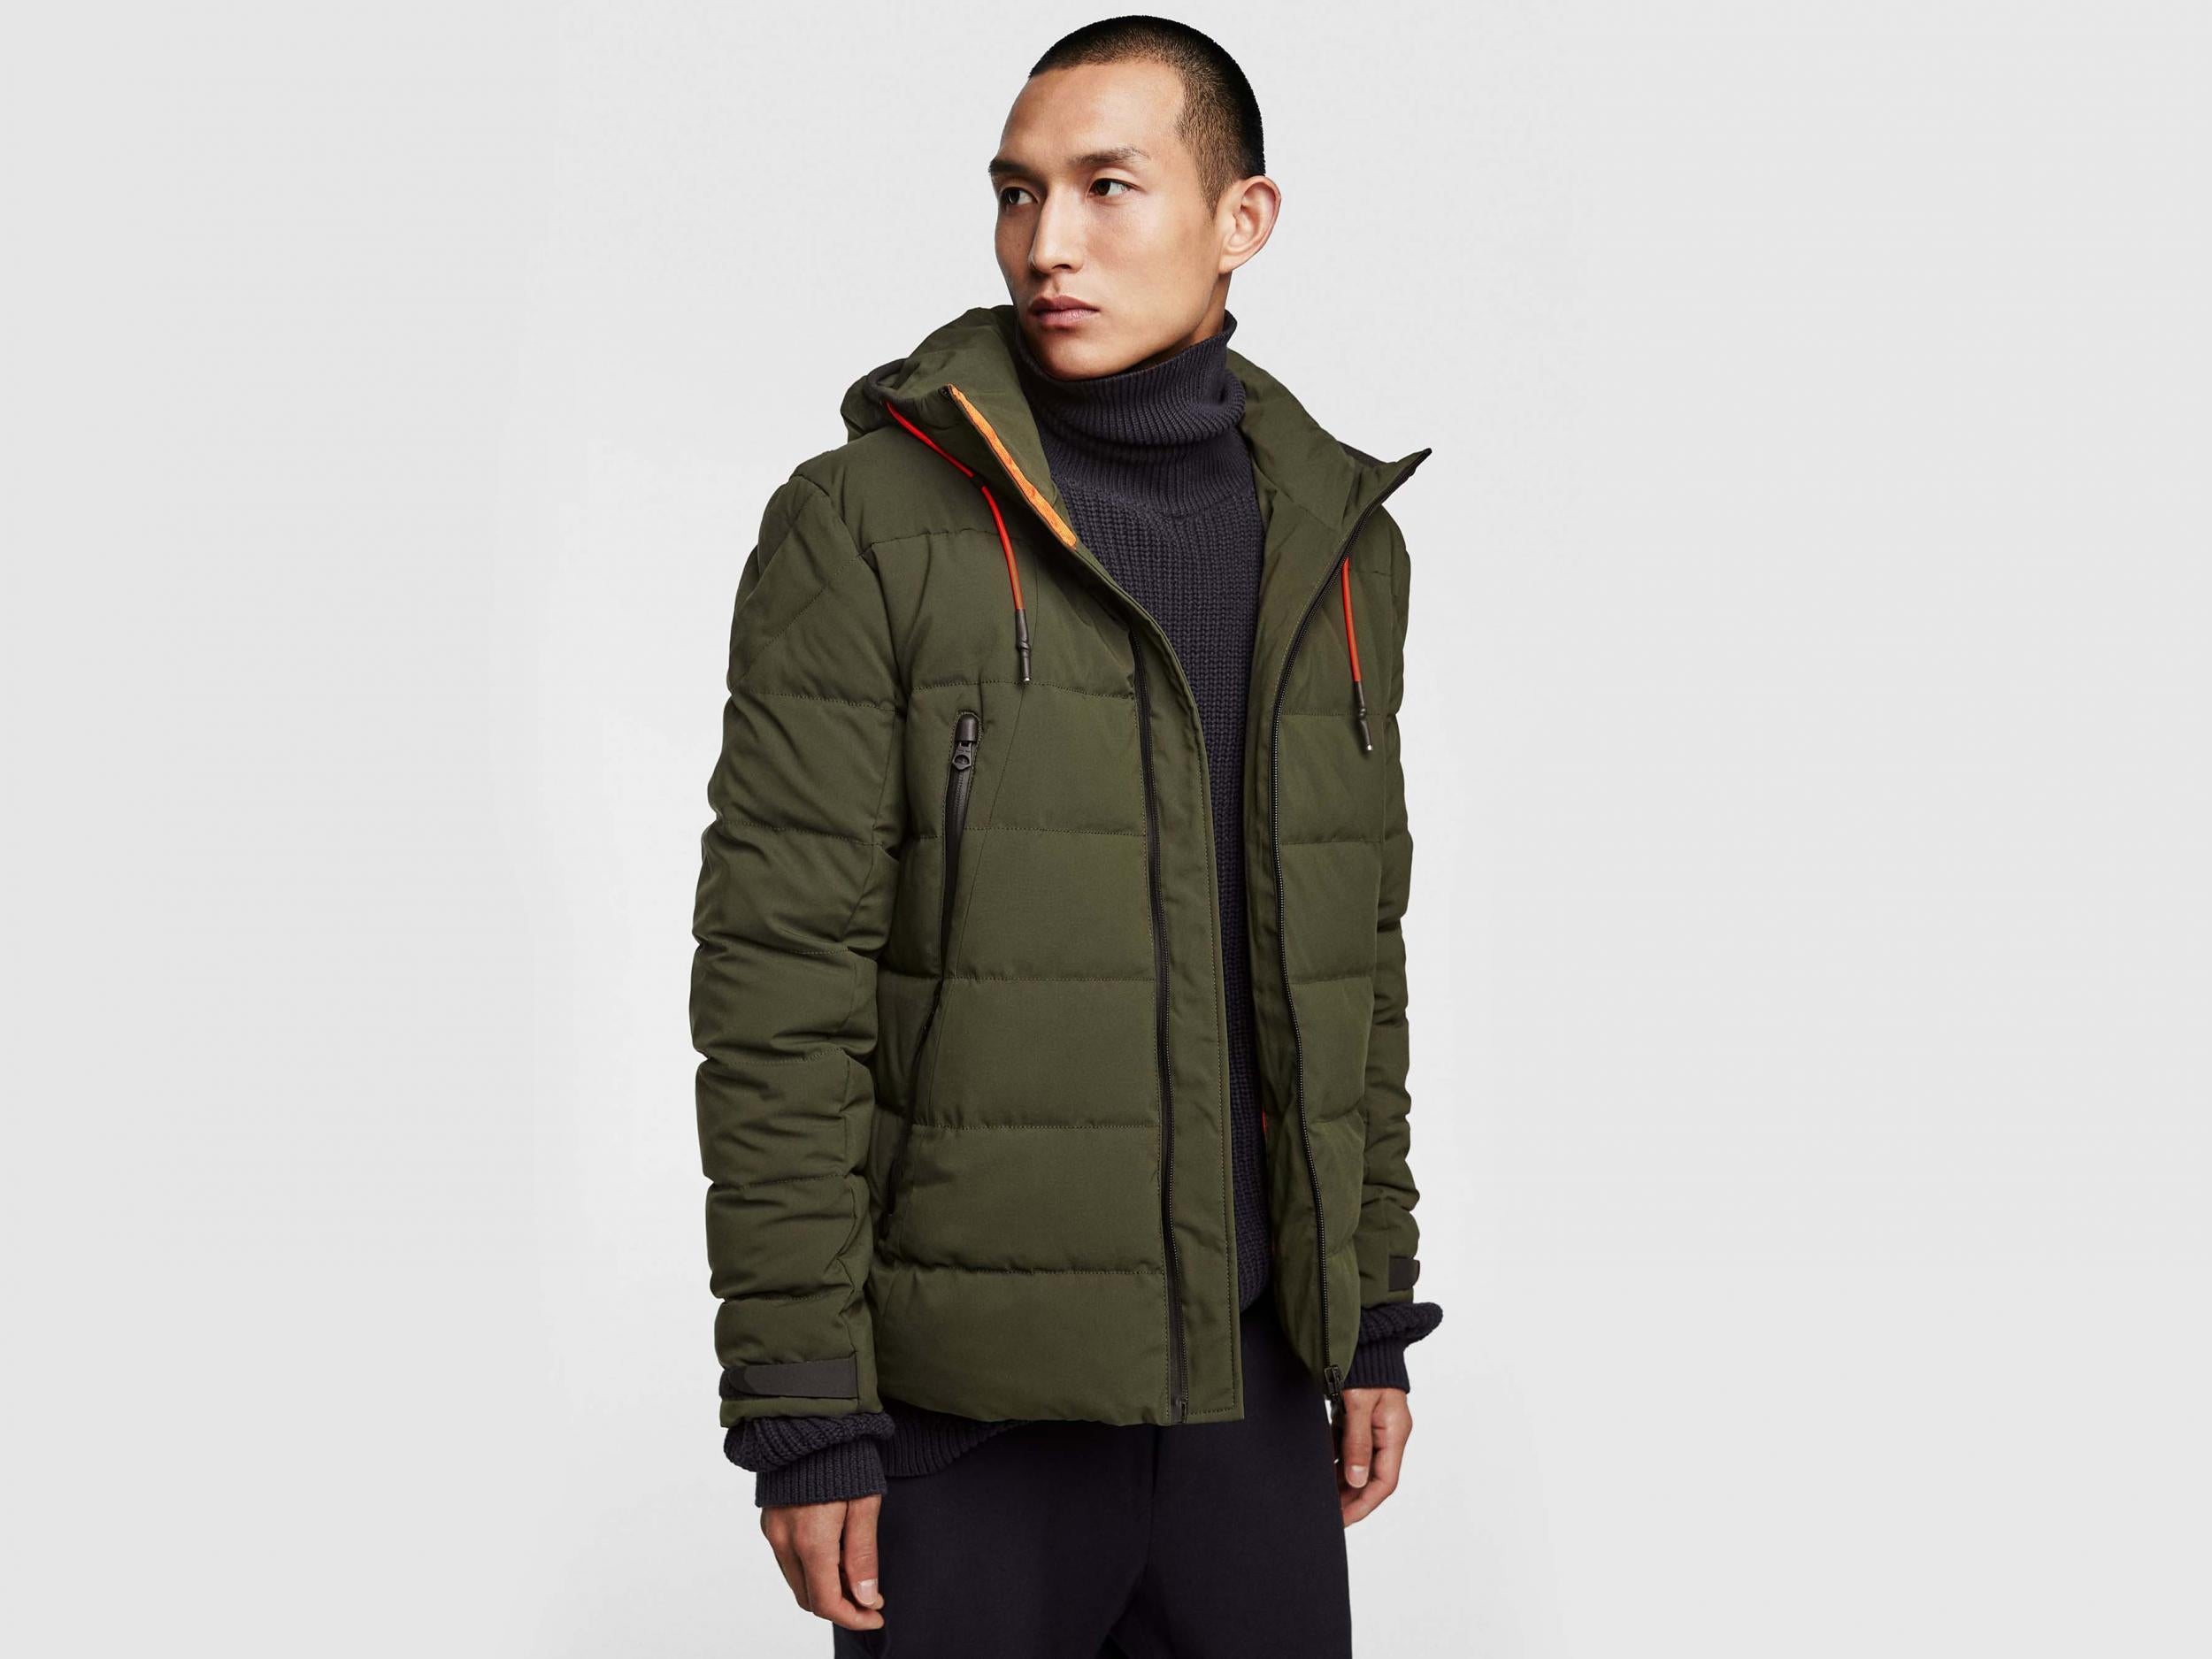 A Menswear Guide To Wearing Puffer Jackets The Independent